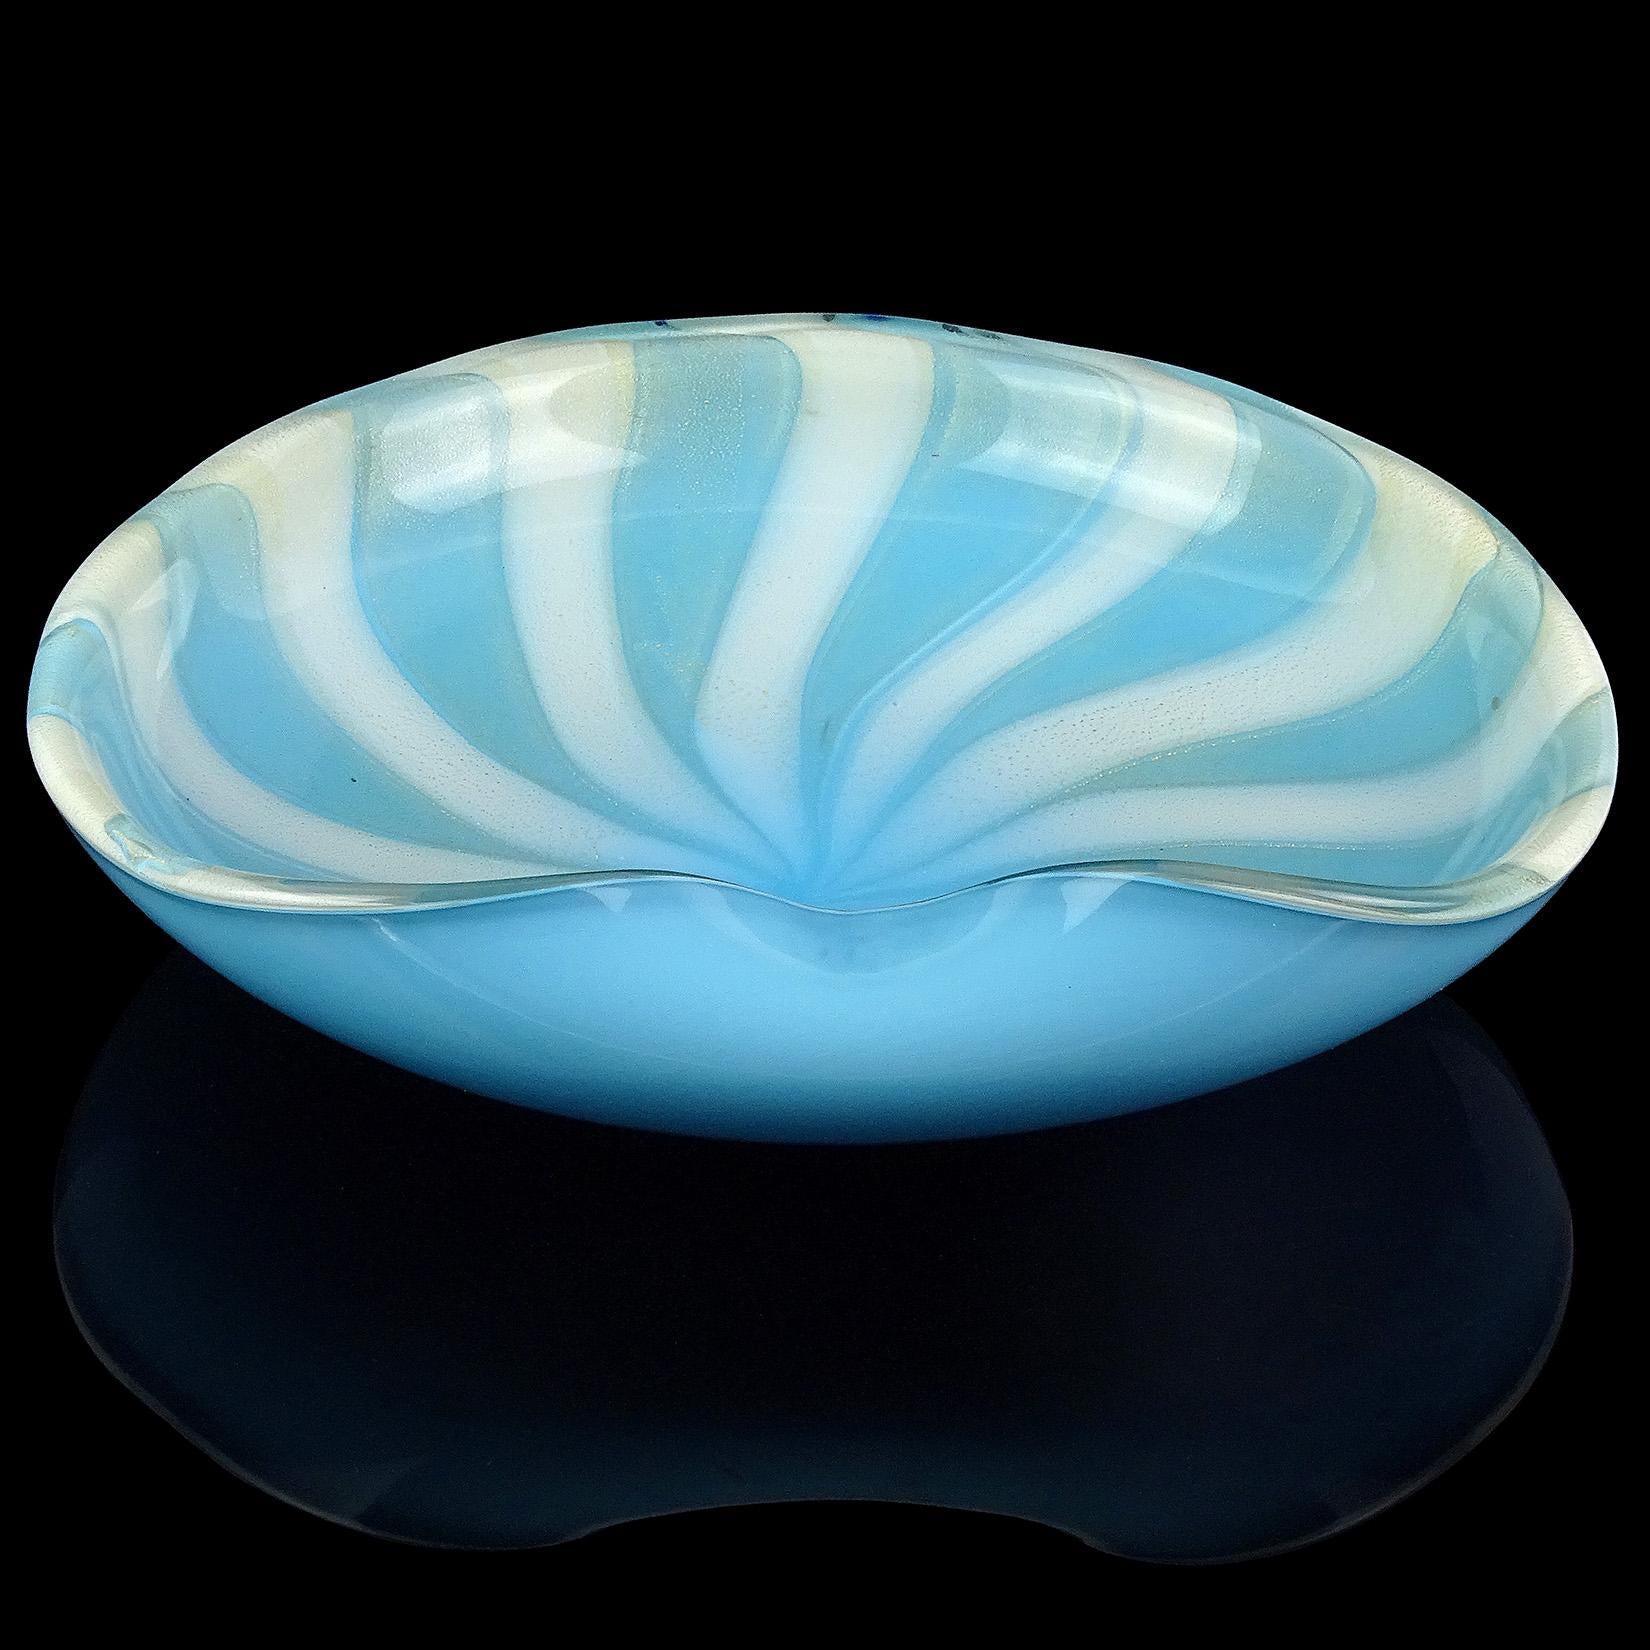 Beautiful large vintage Murano hand blown sky blue, white stripes and gold flecks Italian art glass center bowl. Documented to Master glass artist and designer Alfredo Barbini, circa 1950s. The bowl has a folded over rim, and is profusely covered in